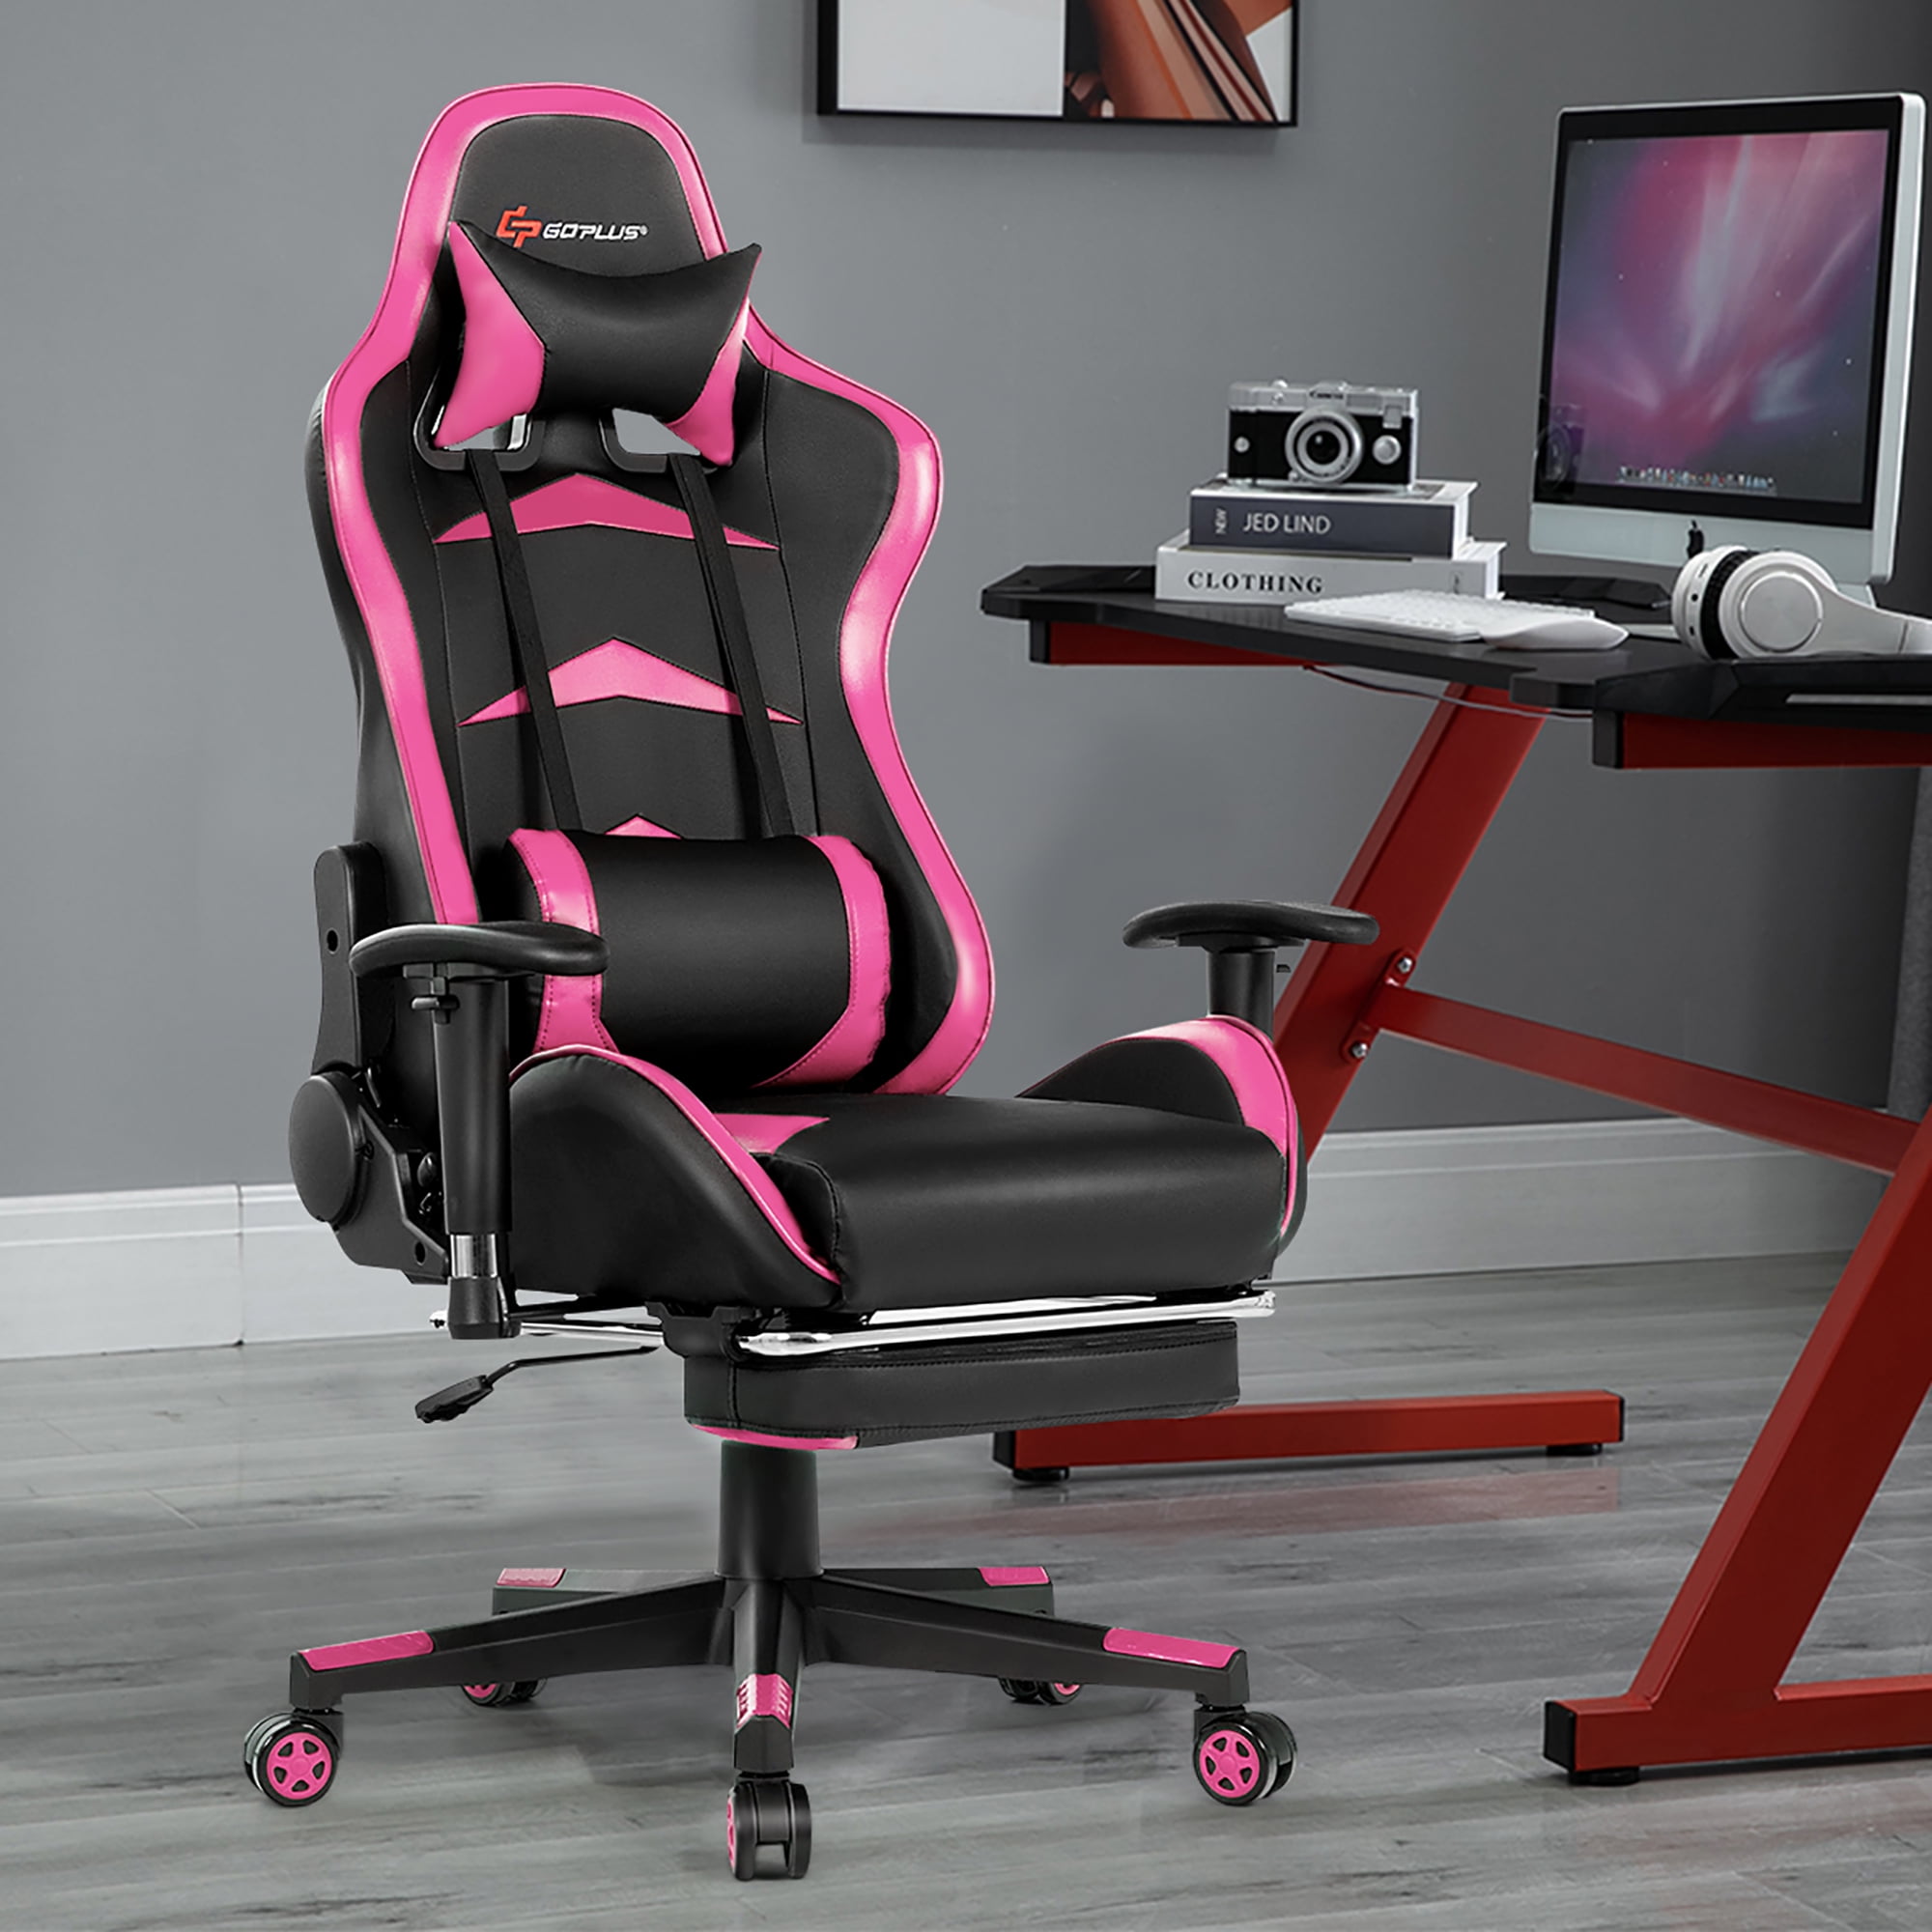 Gaming Chair Office Racing Computer Desk Seat Recliner Footrest Swivel Vibration